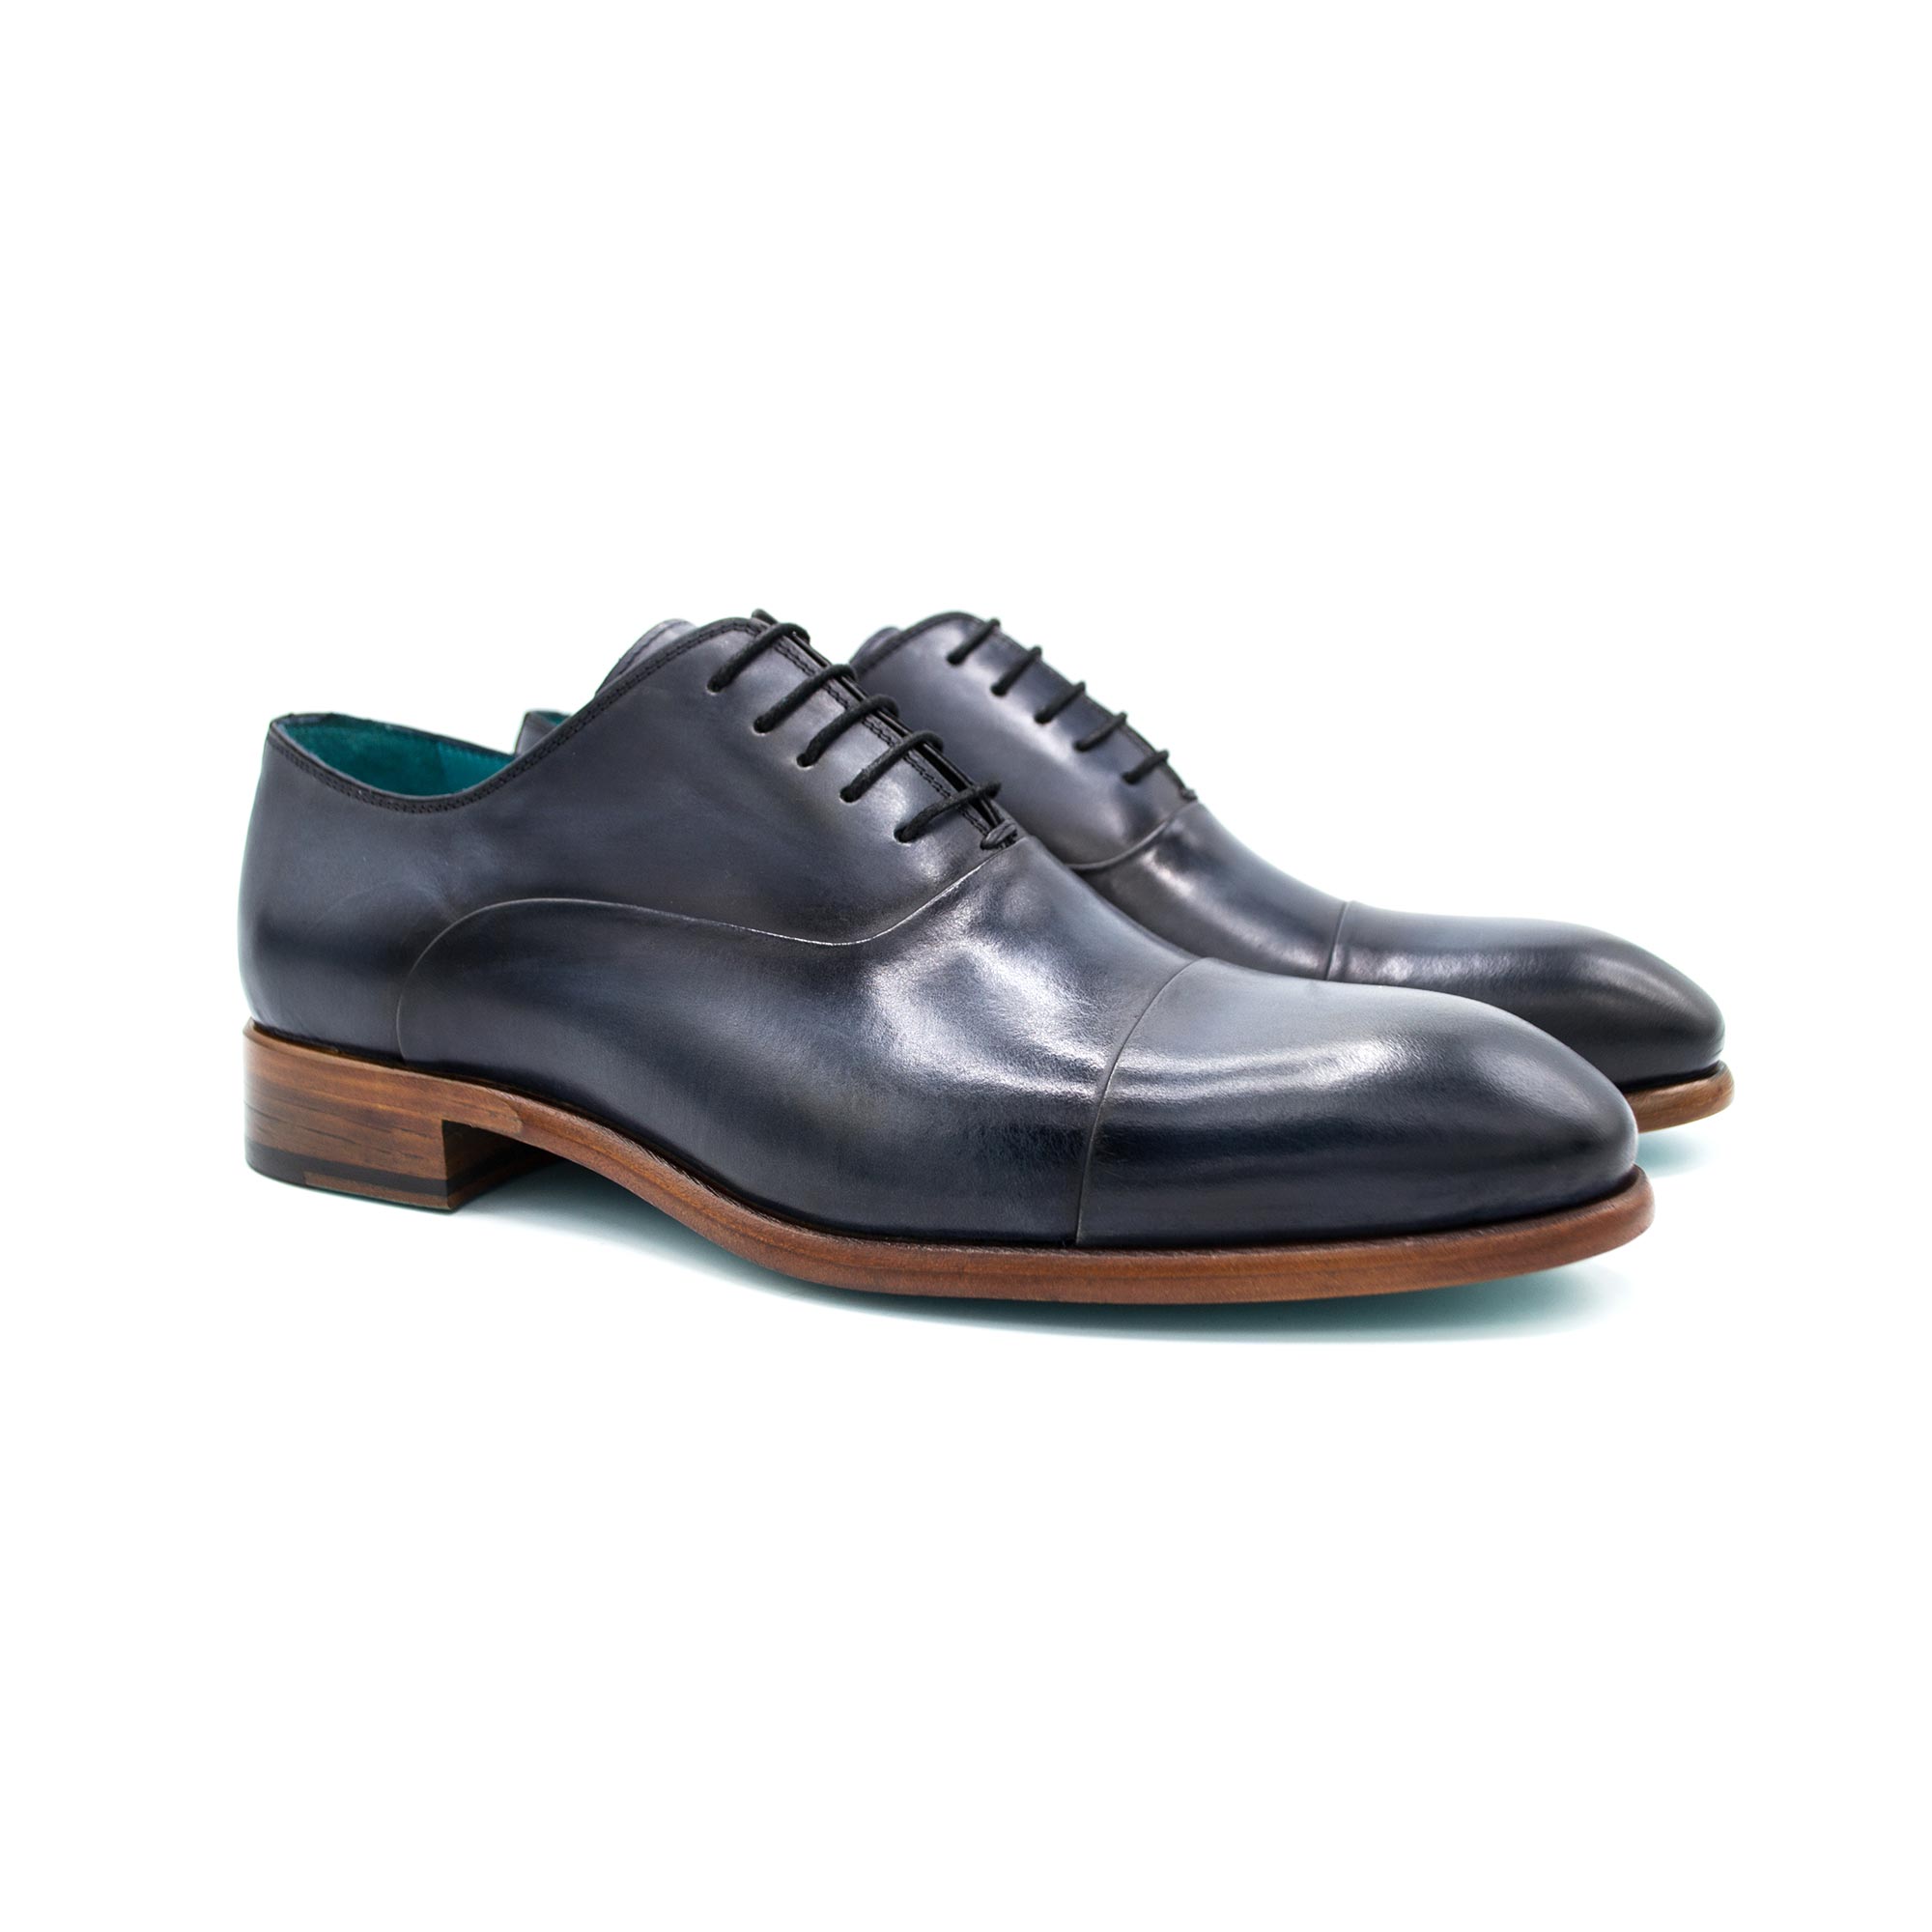 Night Blue Patina Oxford Shoes | Zerbay Collection